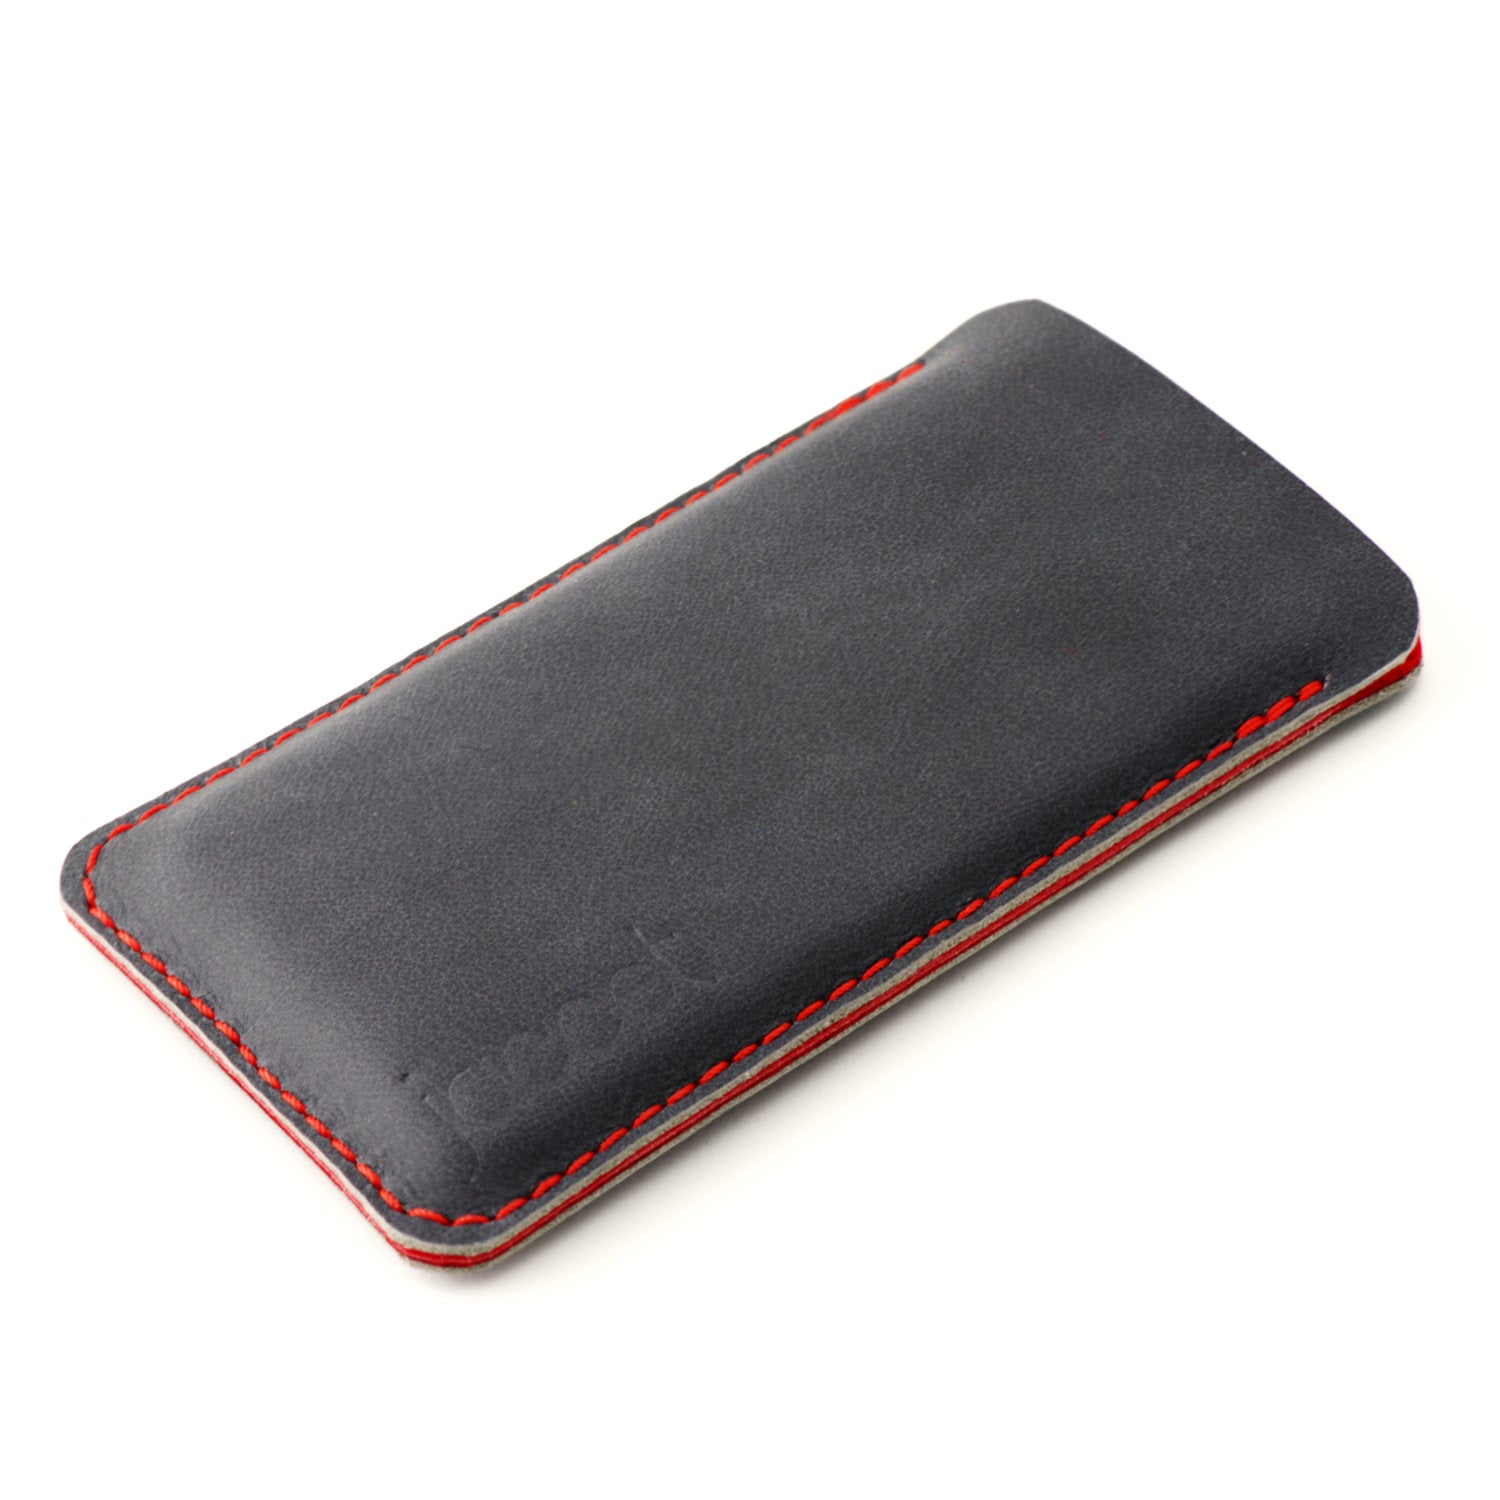 JACCET leather Xiaomi sleeve - anthracite/black leather with red wool felt. 100% Handmade